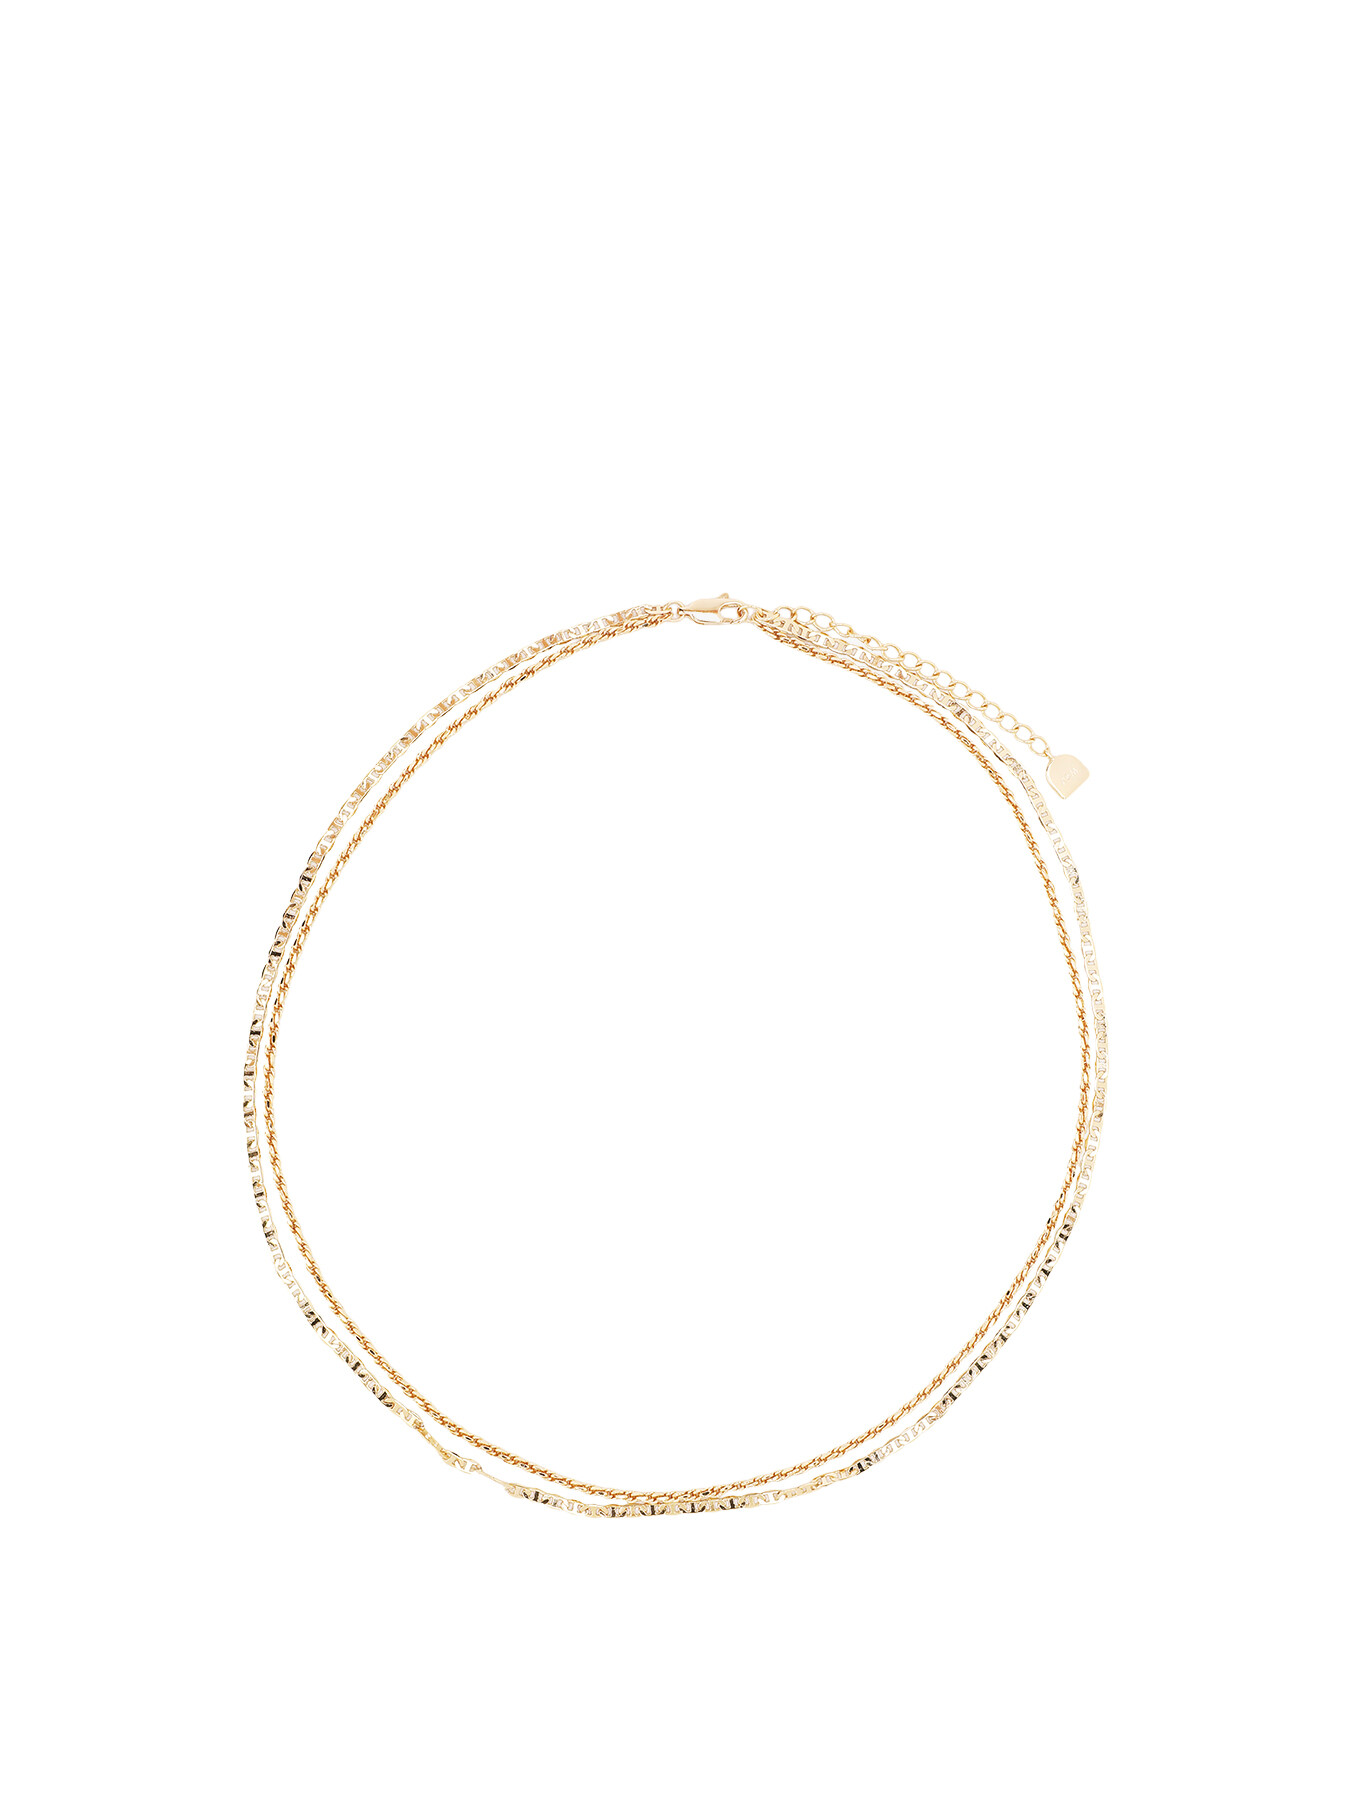 Astrid & Miyu Duo Chain Necklace Gold